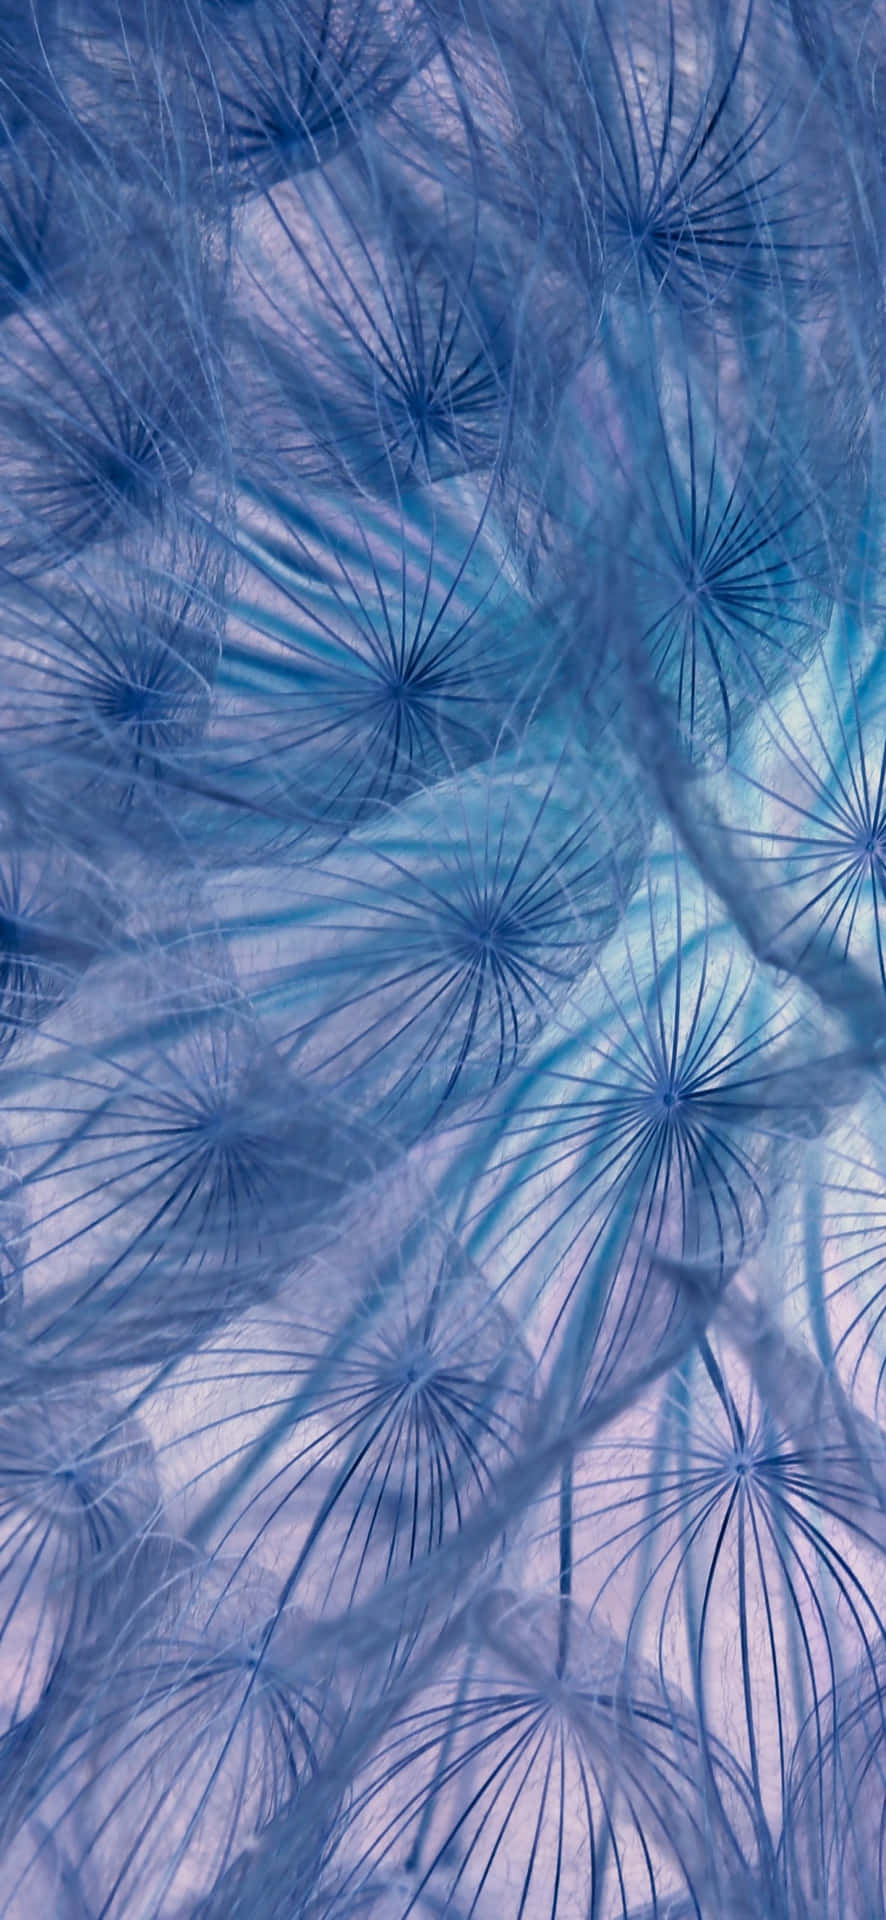 Abstract Dandelion Seeds Blue Background Wallpaper